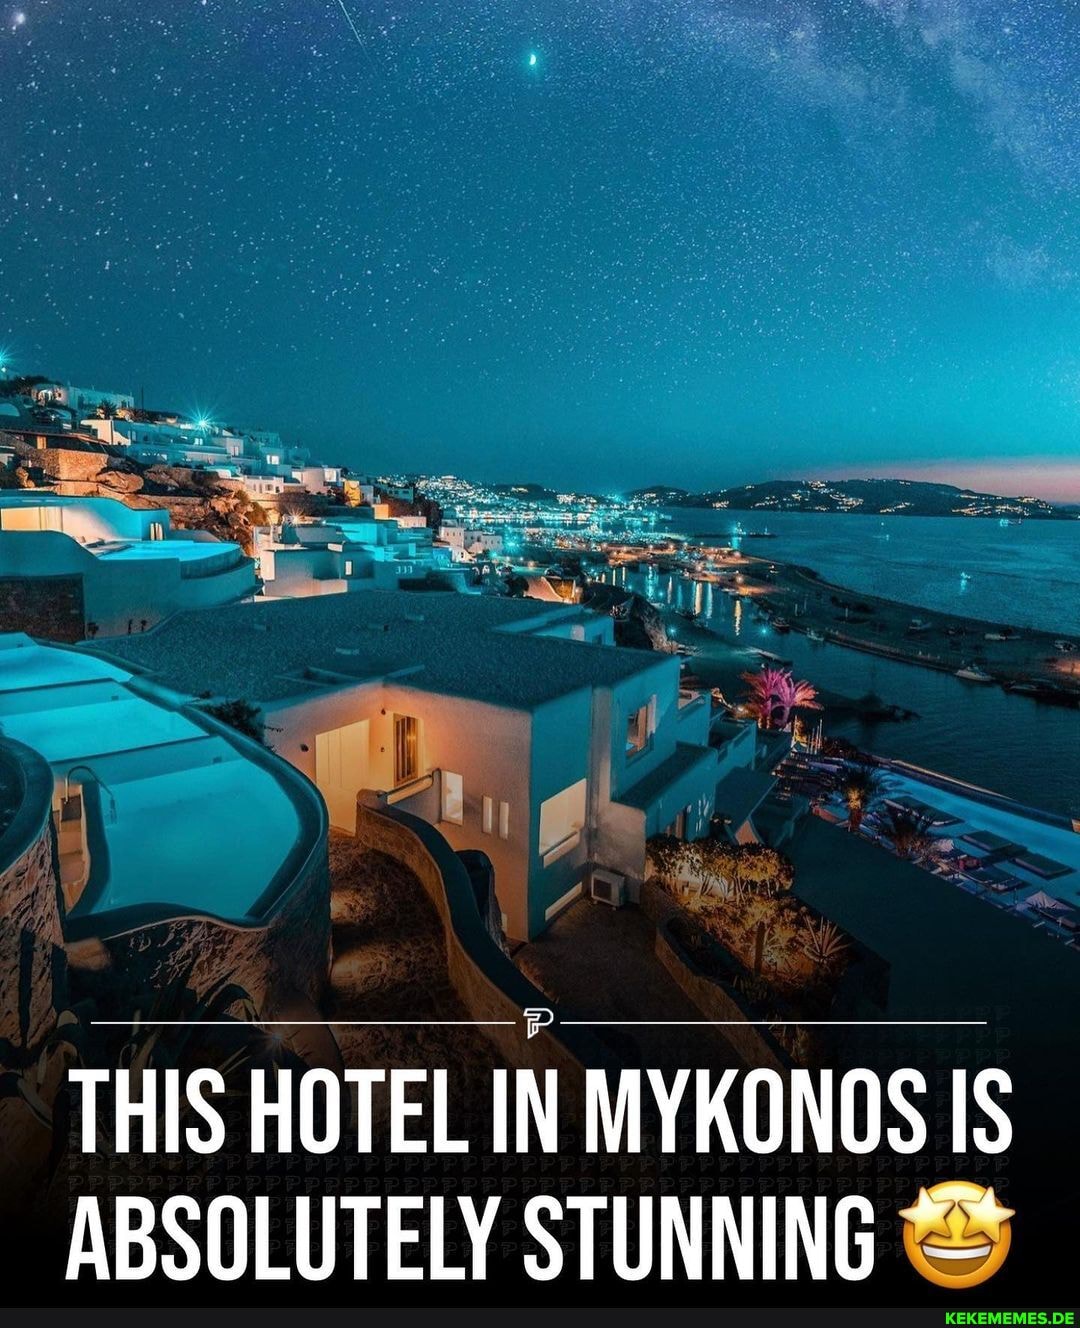 THIS HOTEL IN MYKONOS IS ABSOLUTELY STUNNING